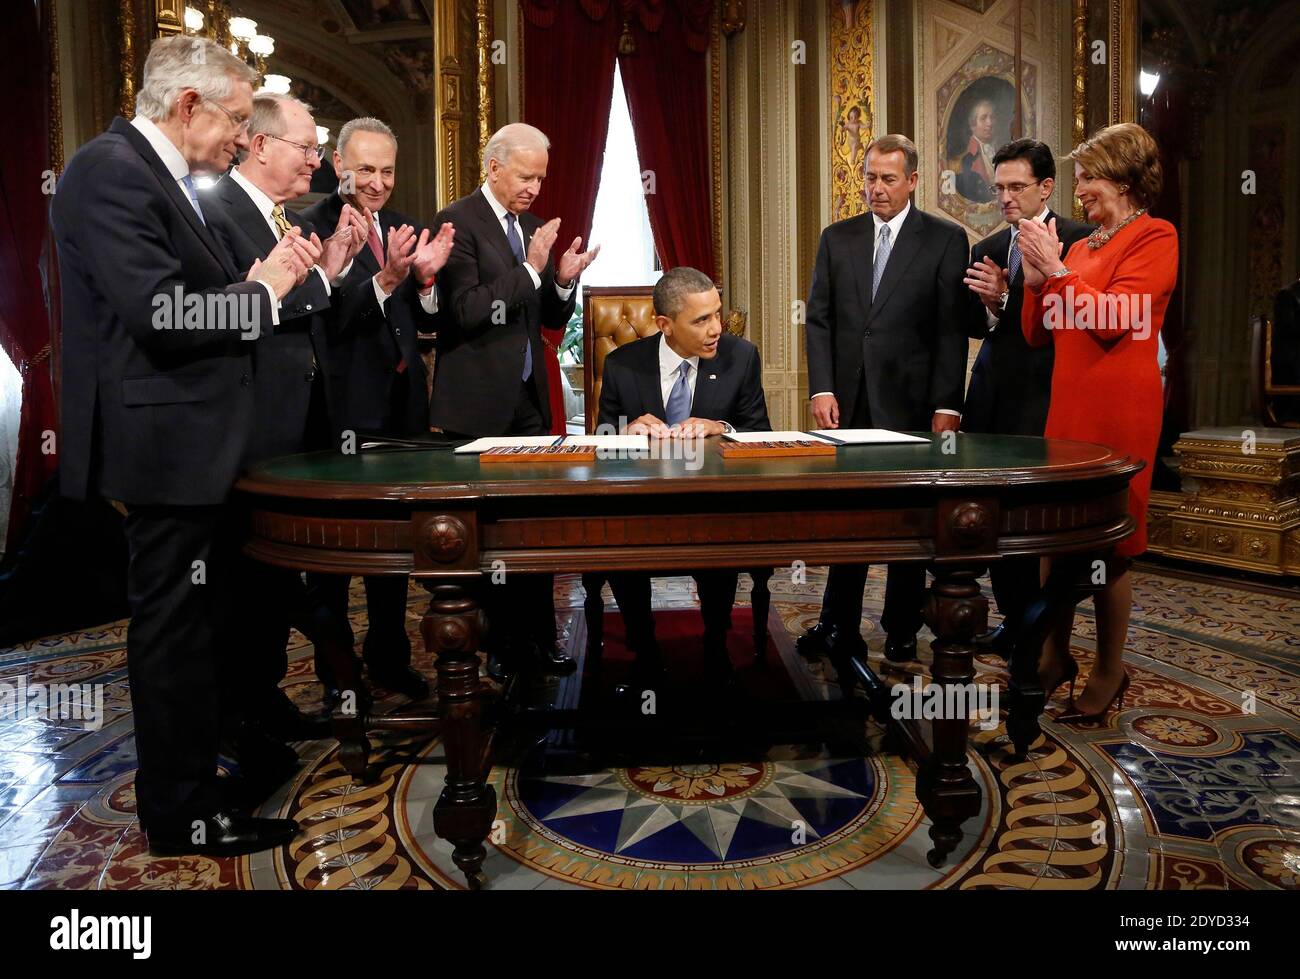 U.S. President Barack Obama (C) is applauded by Senate Majority Leader Harry Reid (D-NV) (L-R), Senator Lamar Alexander (R-TN), Senator Chuck Schumer (D-NY), Vice President Joe Biden, House Speaker John Boehner (R-OH), House Majority Leader Eric Cantor (R-VA) and House Minority Leader Nancy Pelosi (D-CA) after signing a proclamation to commeorate the inauguration, entitled a National Day of Hope and Resolve, directly after swearing-in ceremonies in the U.S Capitol in Washington on January 21, 2013. Photo by Jonathan Ernst/Pool/ABACAPRESS.COM Stock Photo